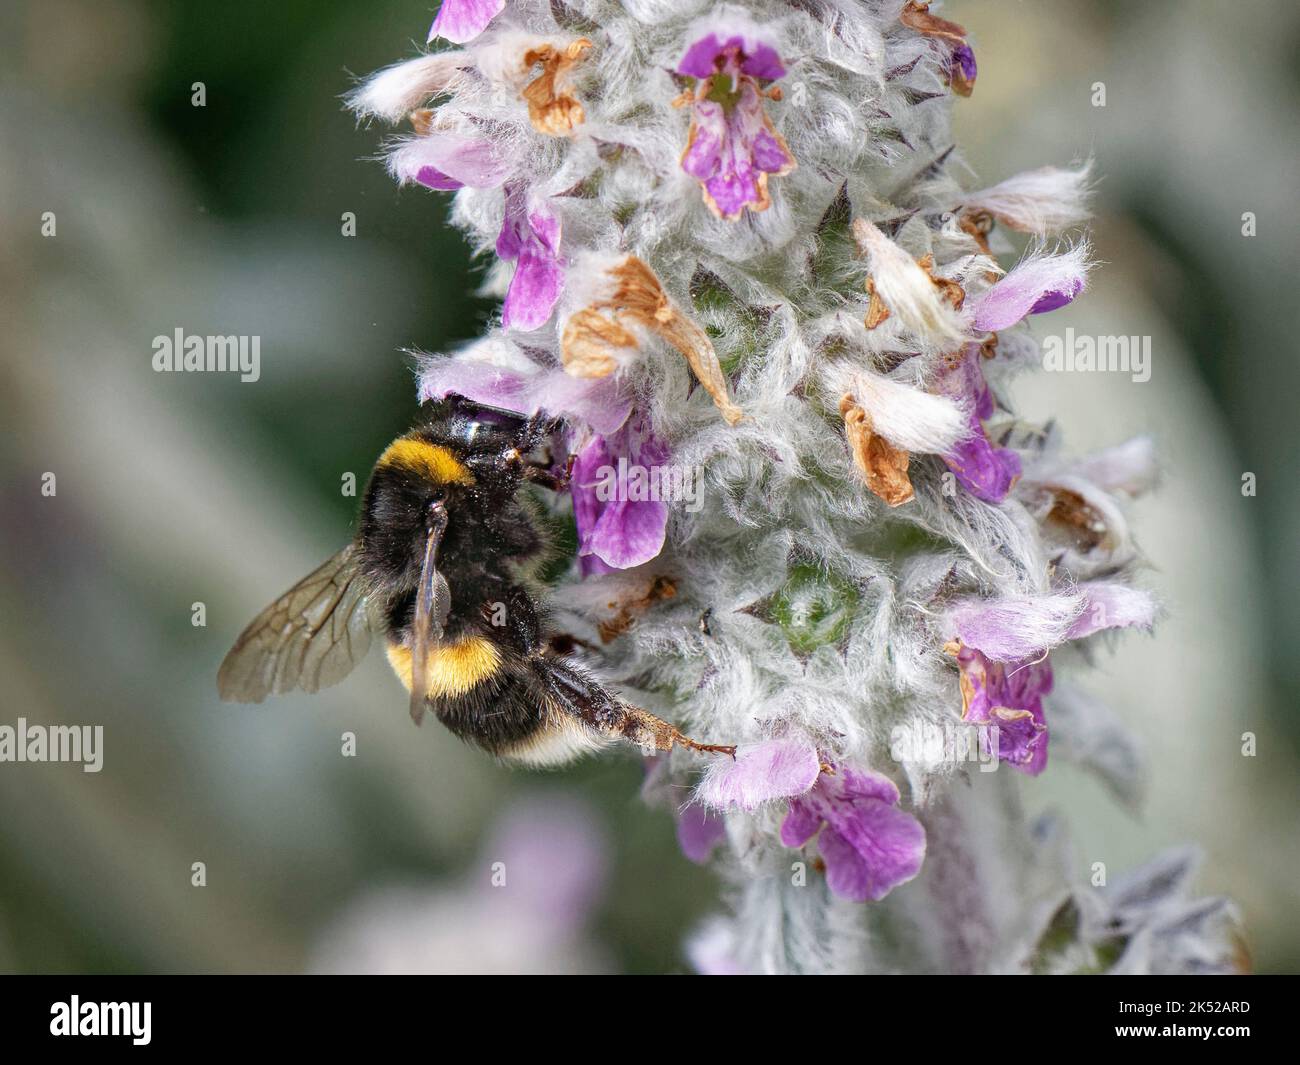 Buff-tailed bumblebee (Bombus terrestris) nectaring on Lamb’s ear (Stachys byzantina) flowers in a garden flowerbed, Wiltshire, UK, July. Stock Photo